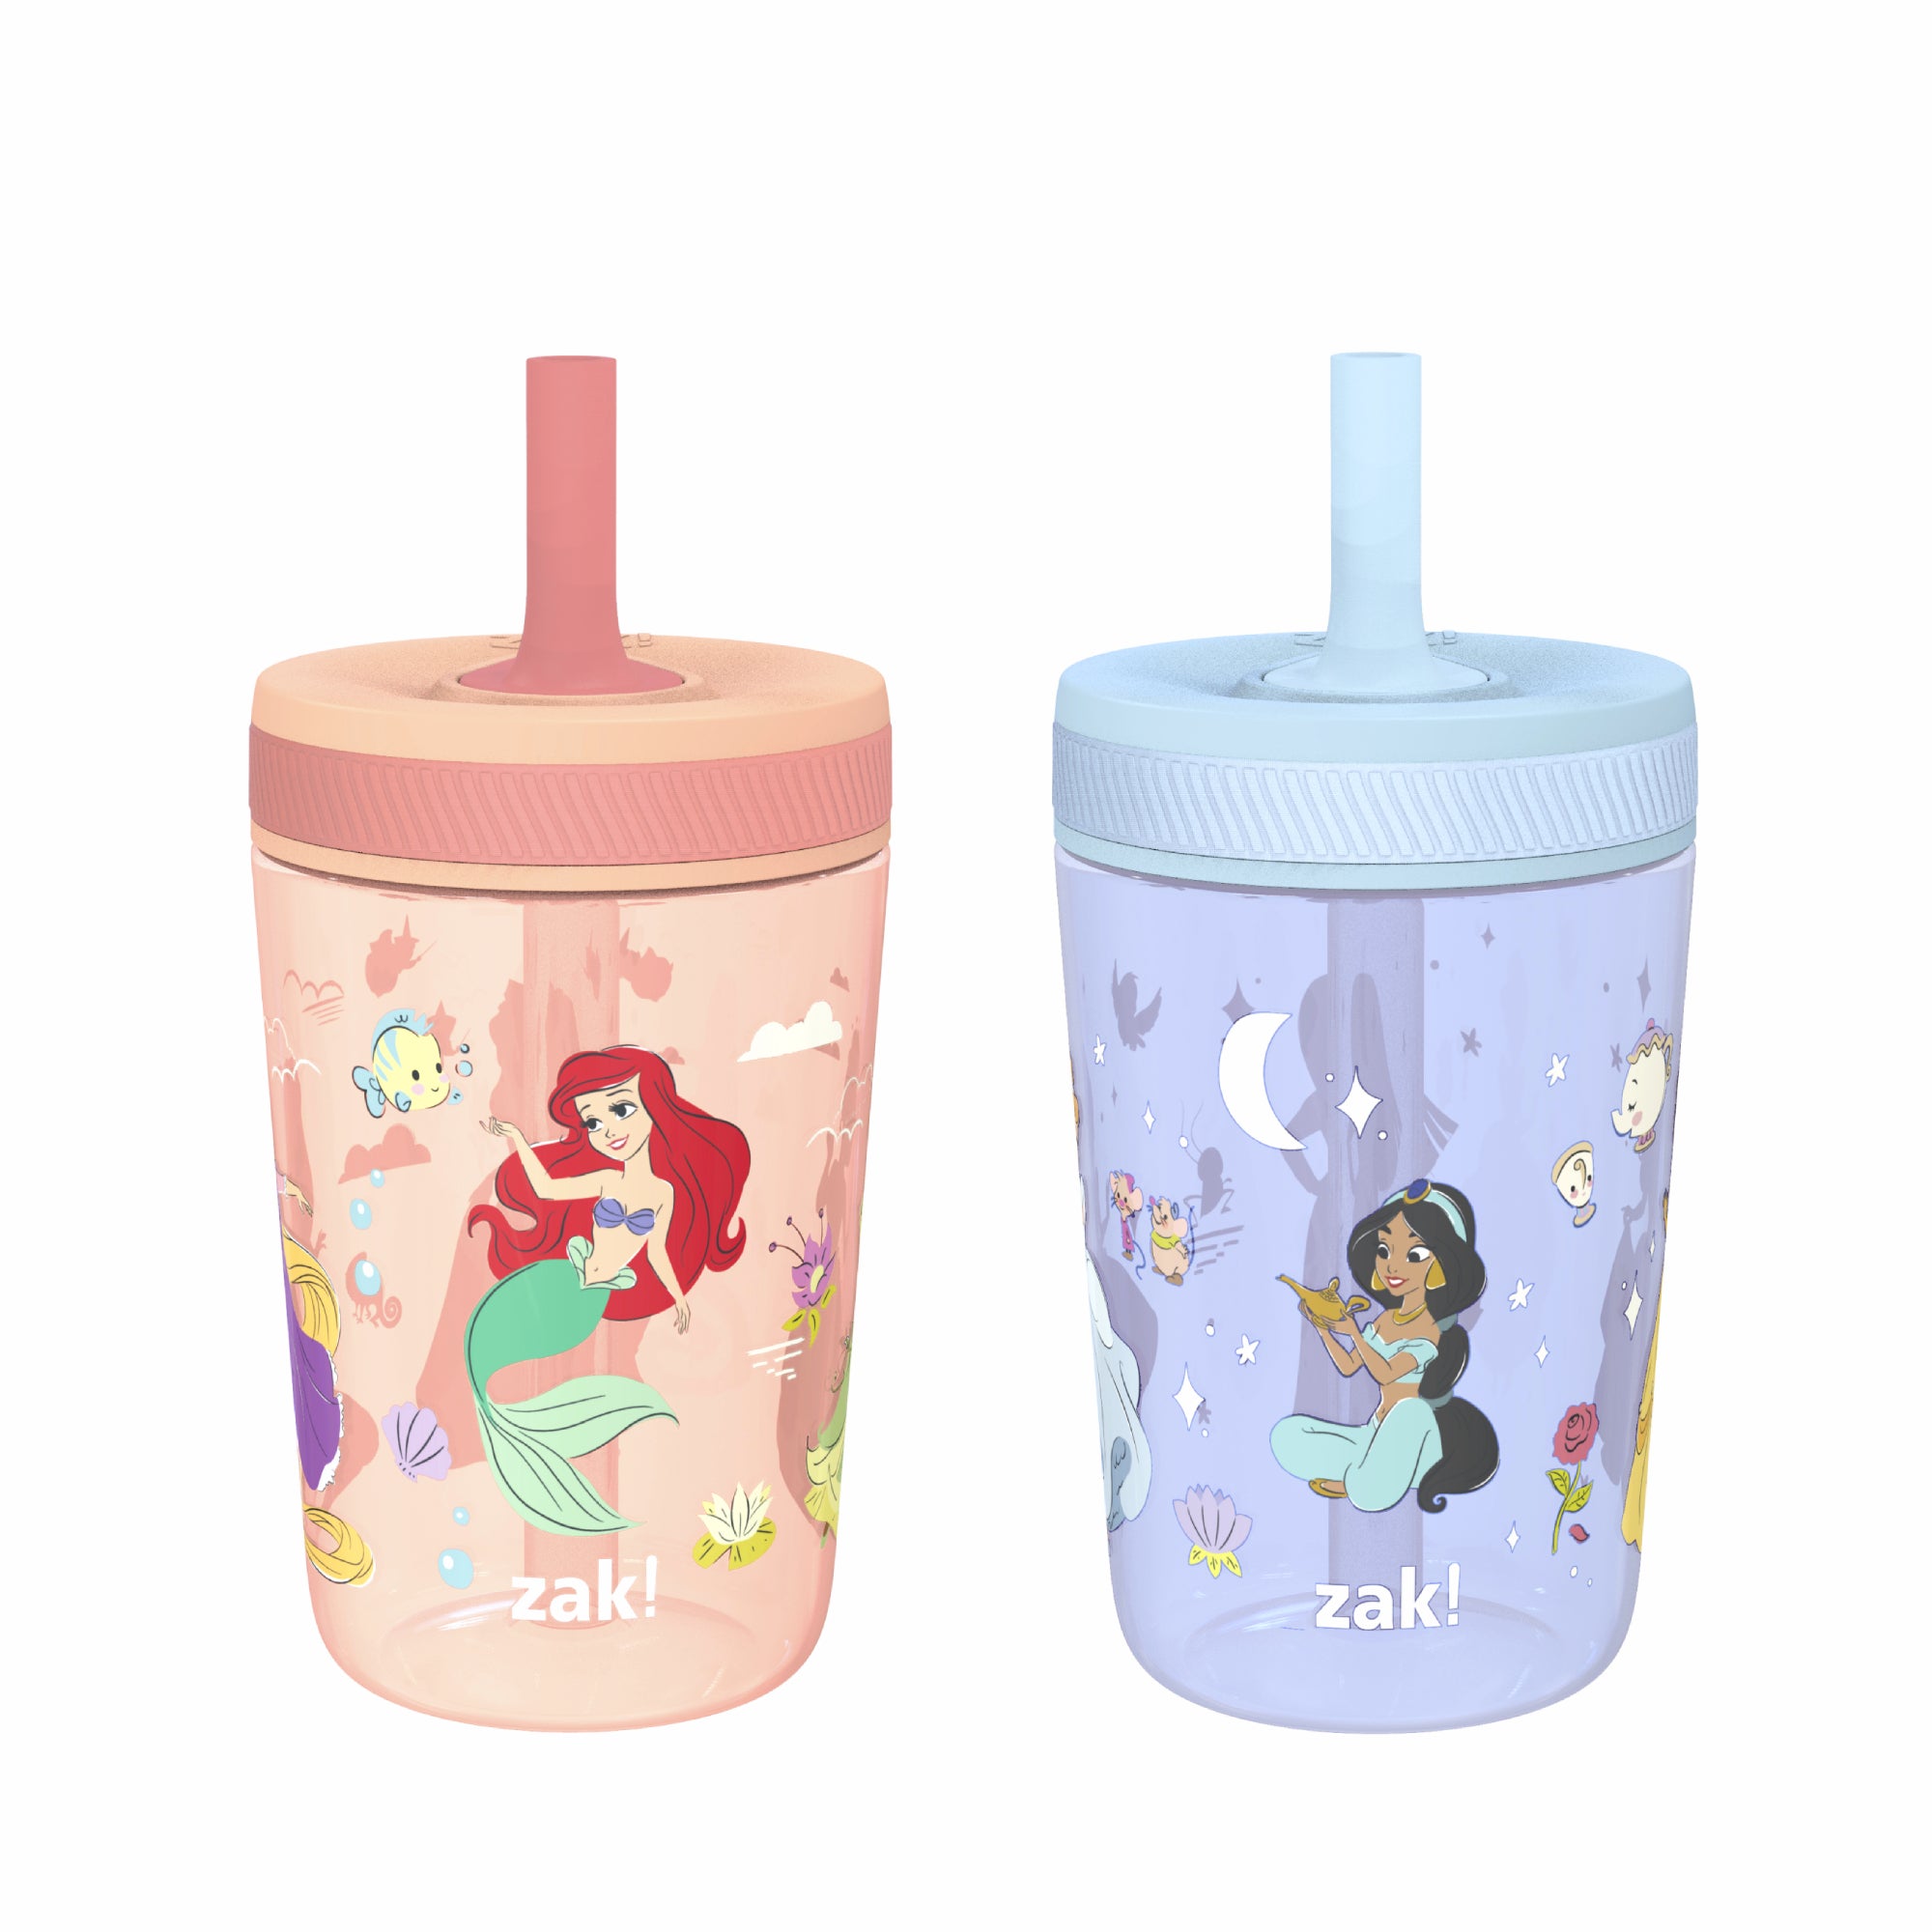 The First Years Disney Frozen Insulated Sippy Cups 9 oz 2 Count Dishwasher Safe Leak and Spill Proof Toddler Cups Made Without BPA